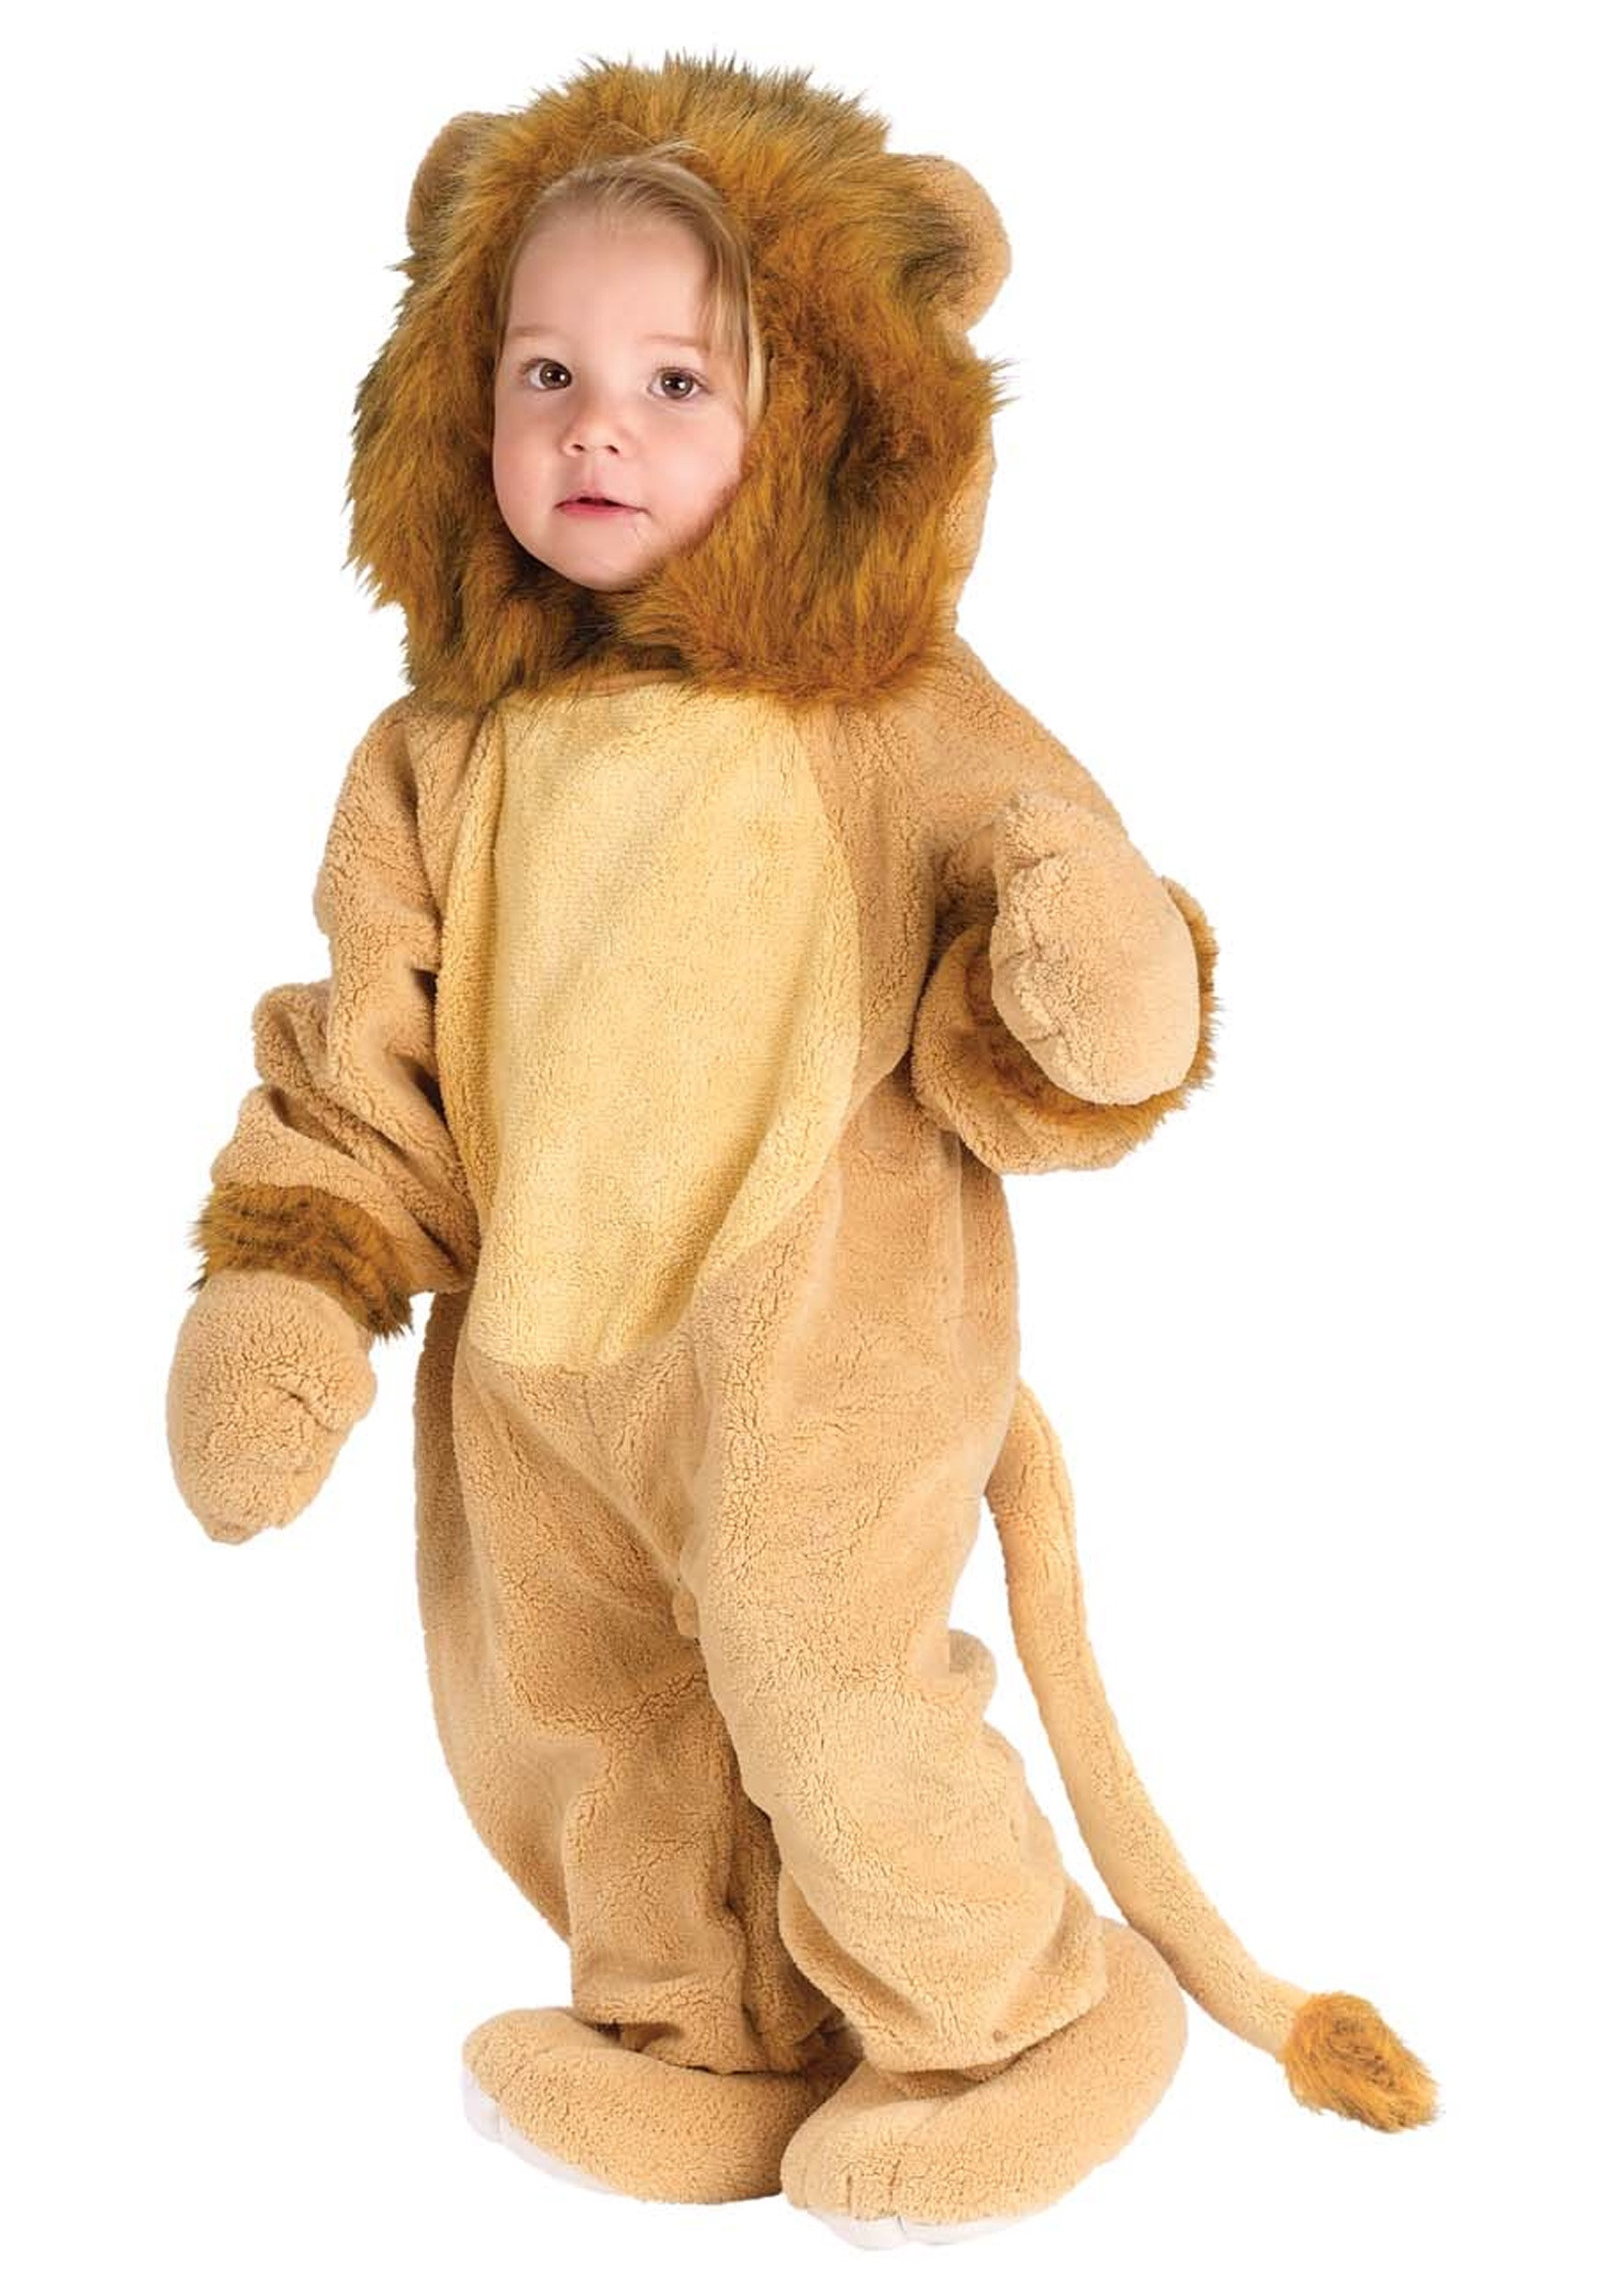 DIY Lion Costume For Toddler
 Baby Cuddley Lion Costume